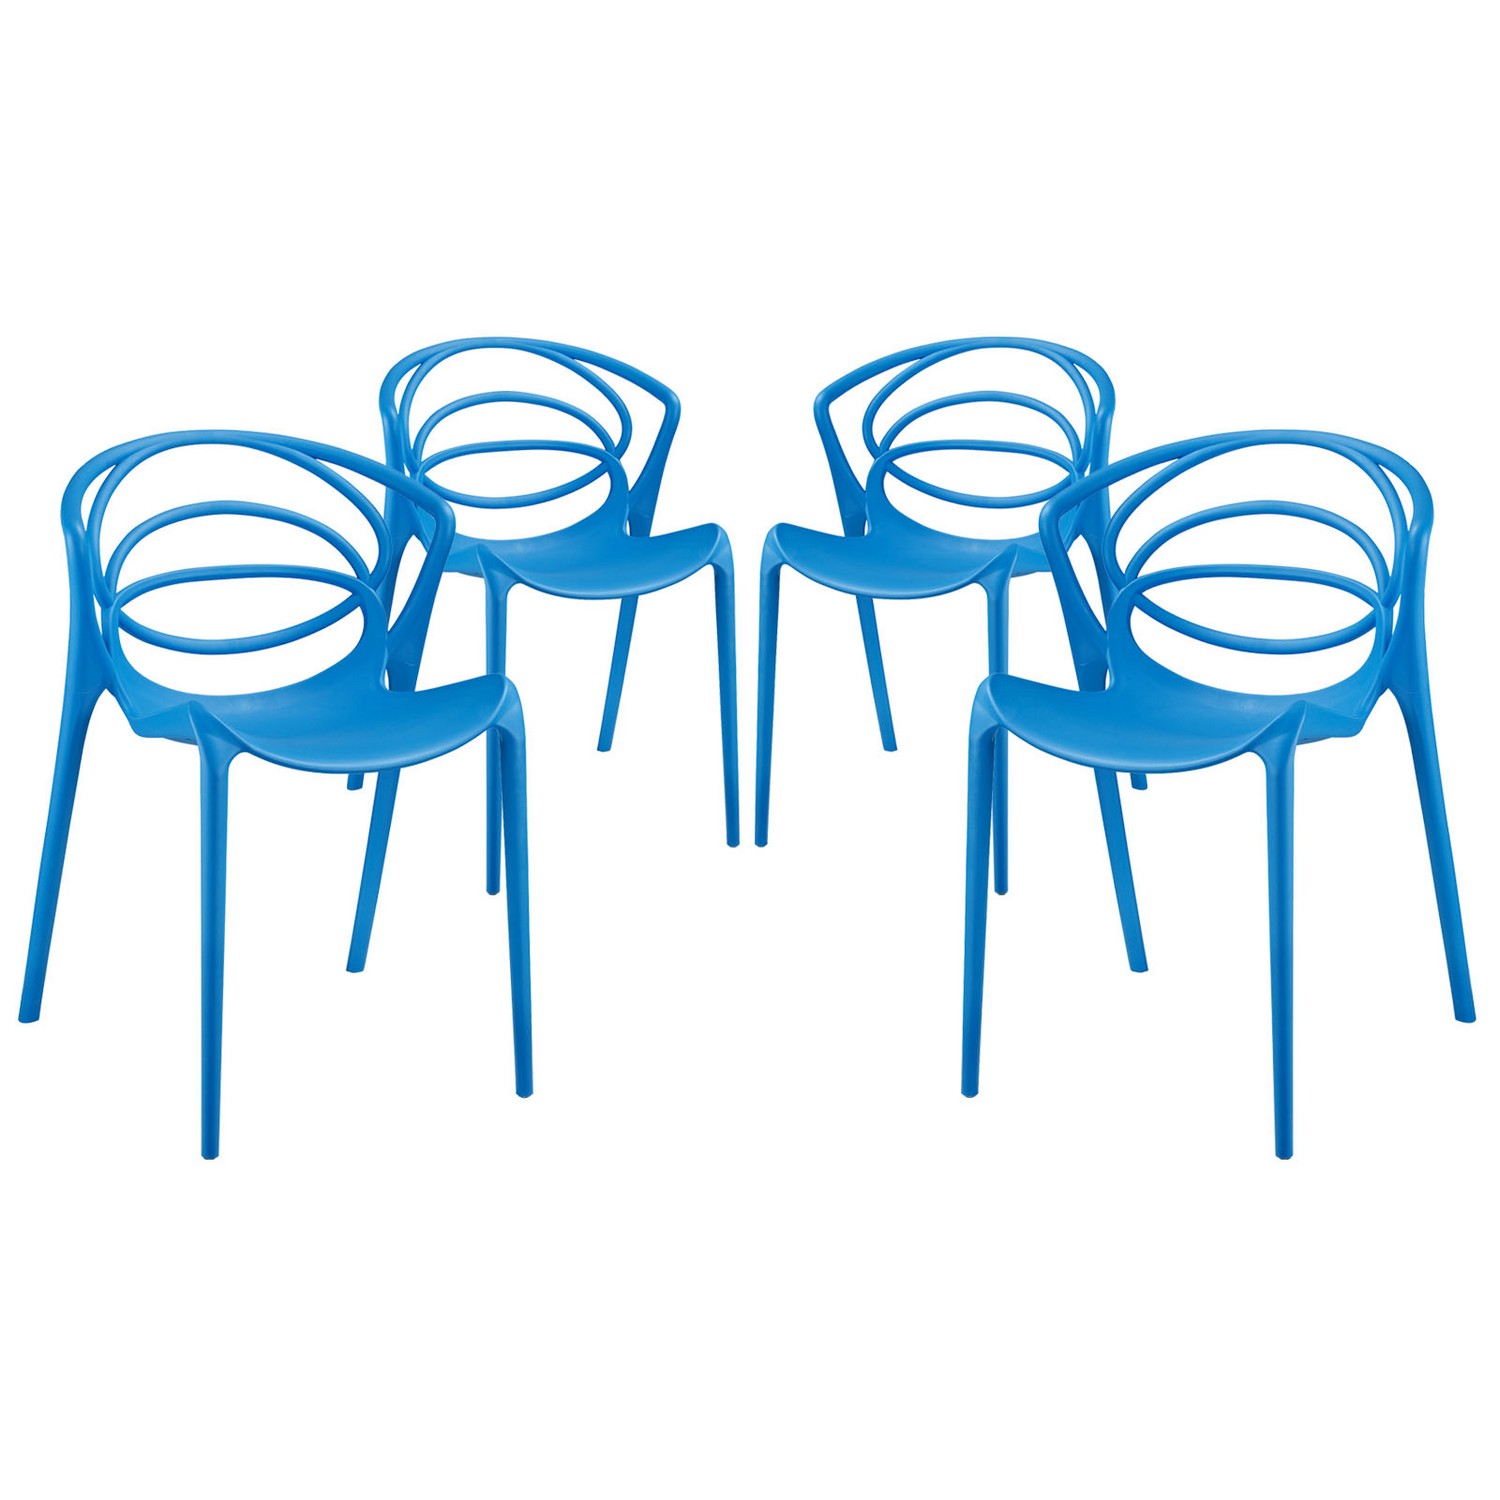 Modway Locus Dining Chair - Set of 4 - Blue